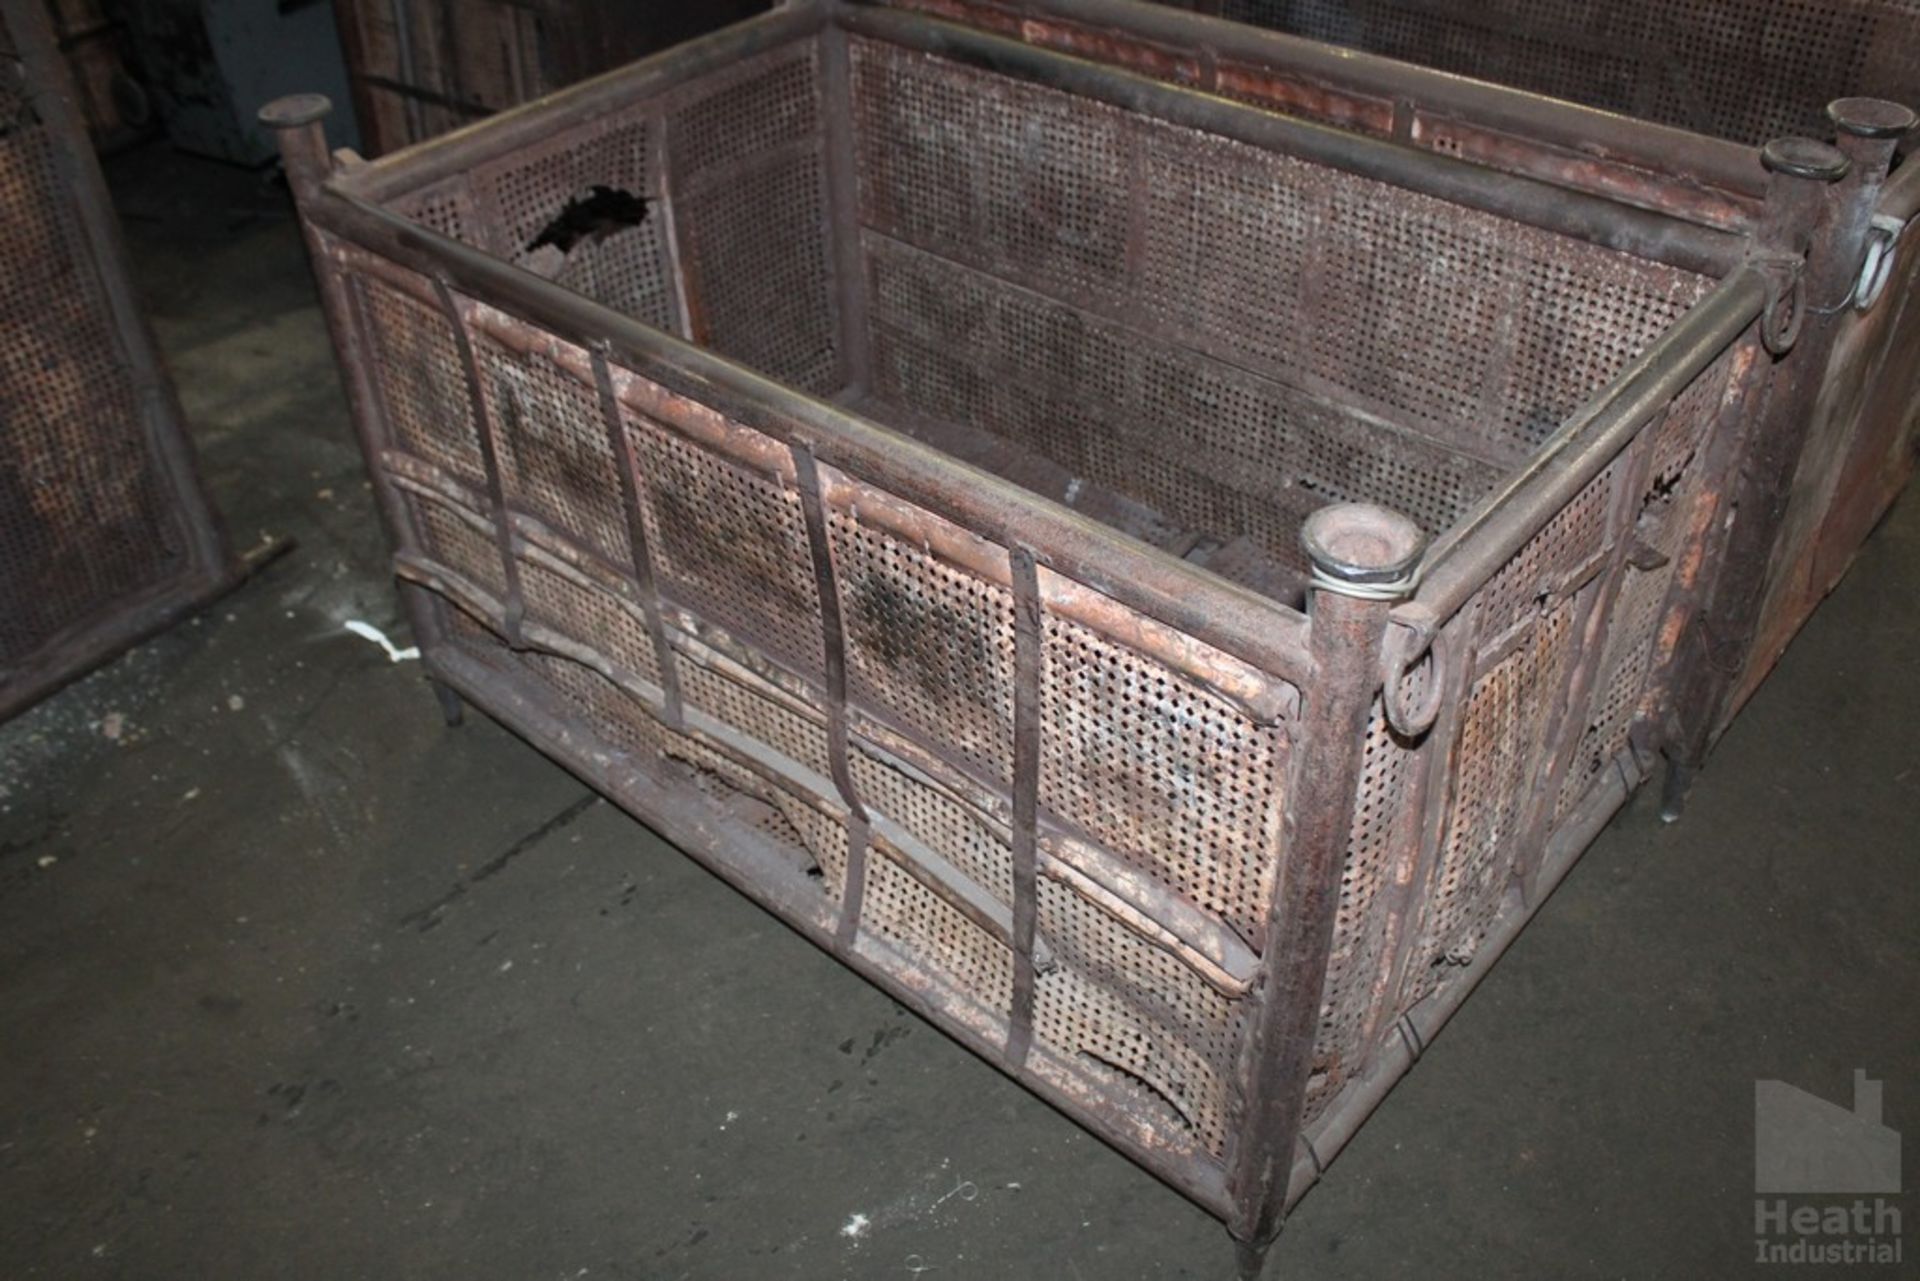 FORKLIFTABLE STACKABLE STEEL MESH CRATE 48" X 30" X 30"